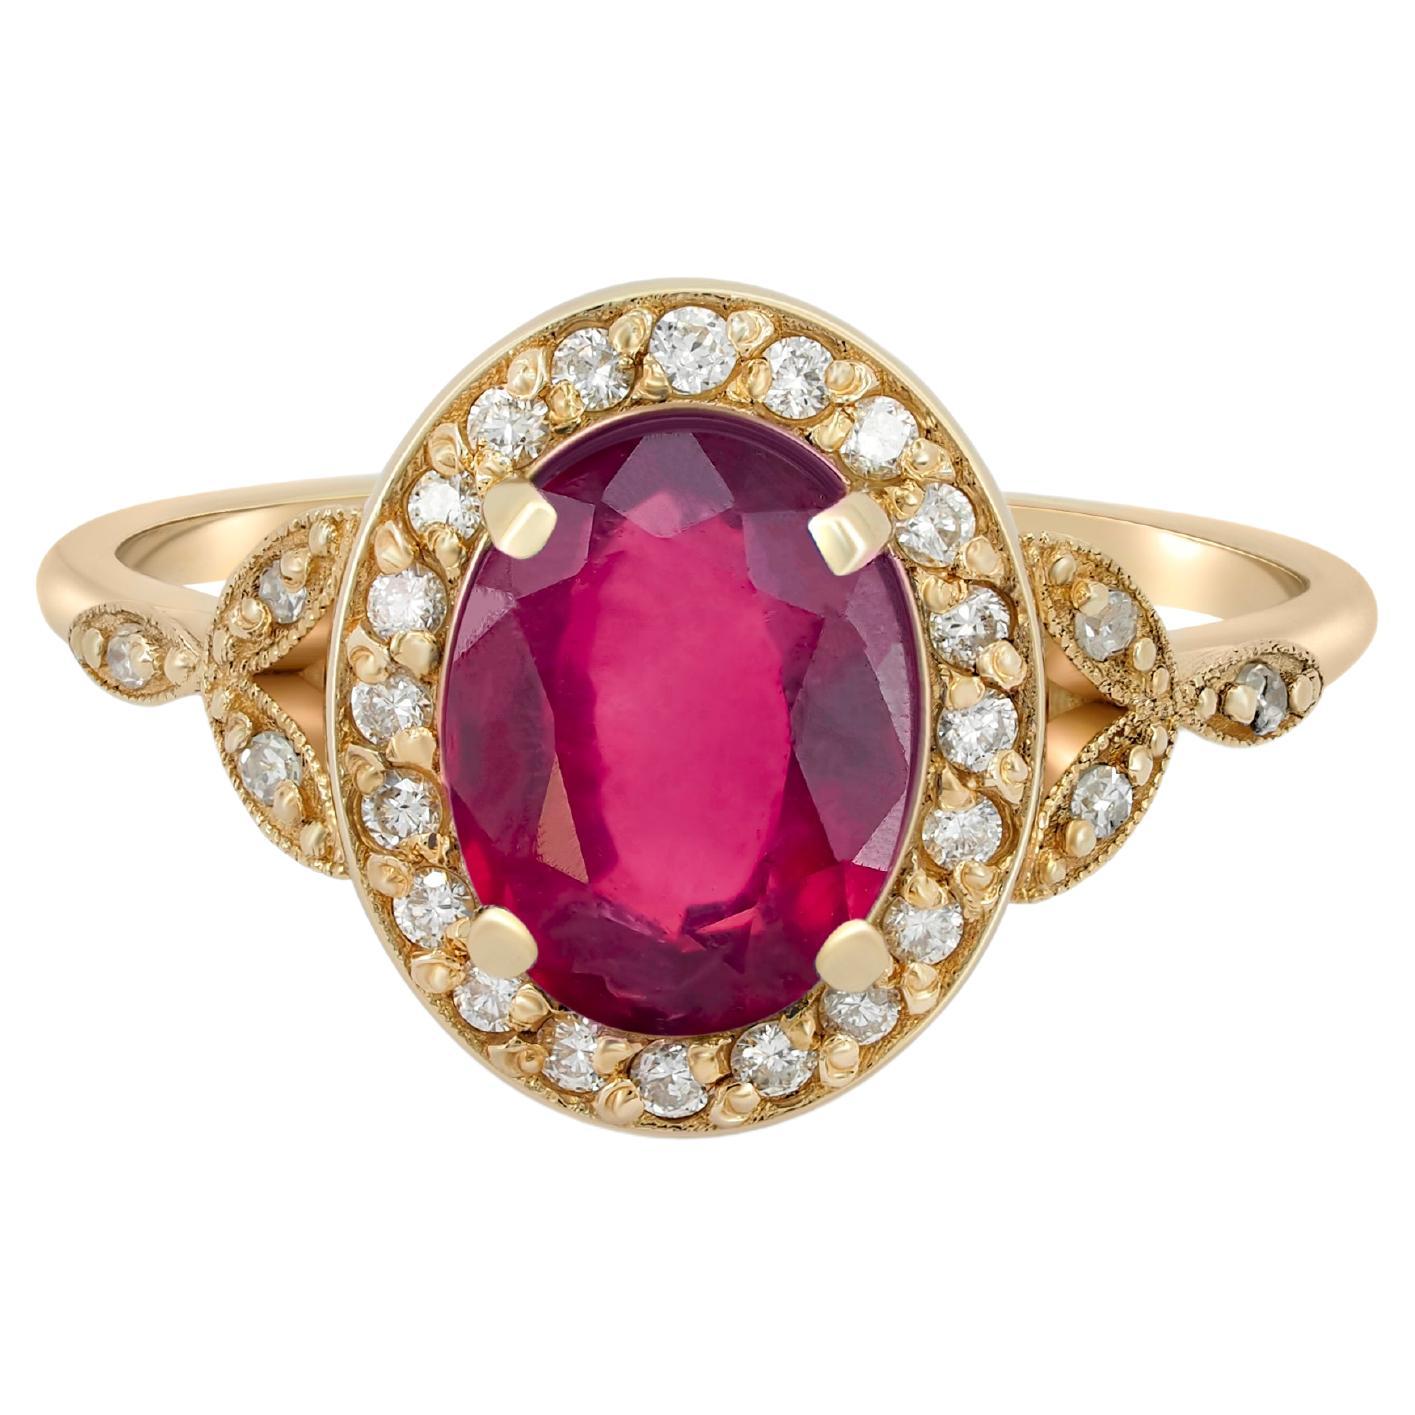 What is a 1 carat ruby worth?